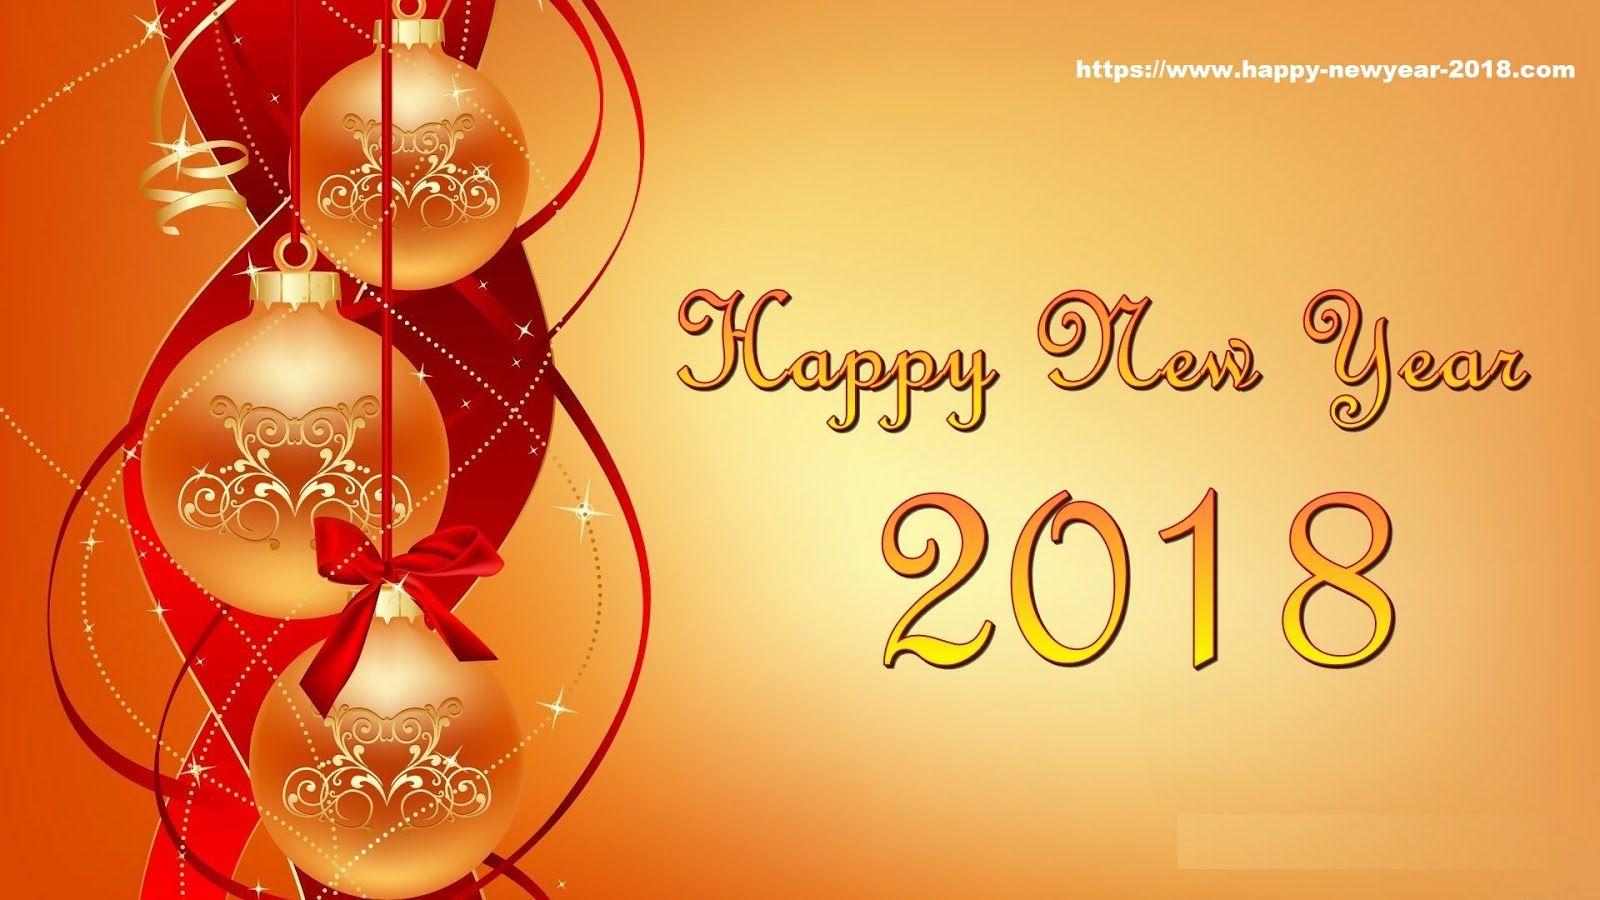 Happy New Year 2018 HD Wallpaper Of Happy New Year